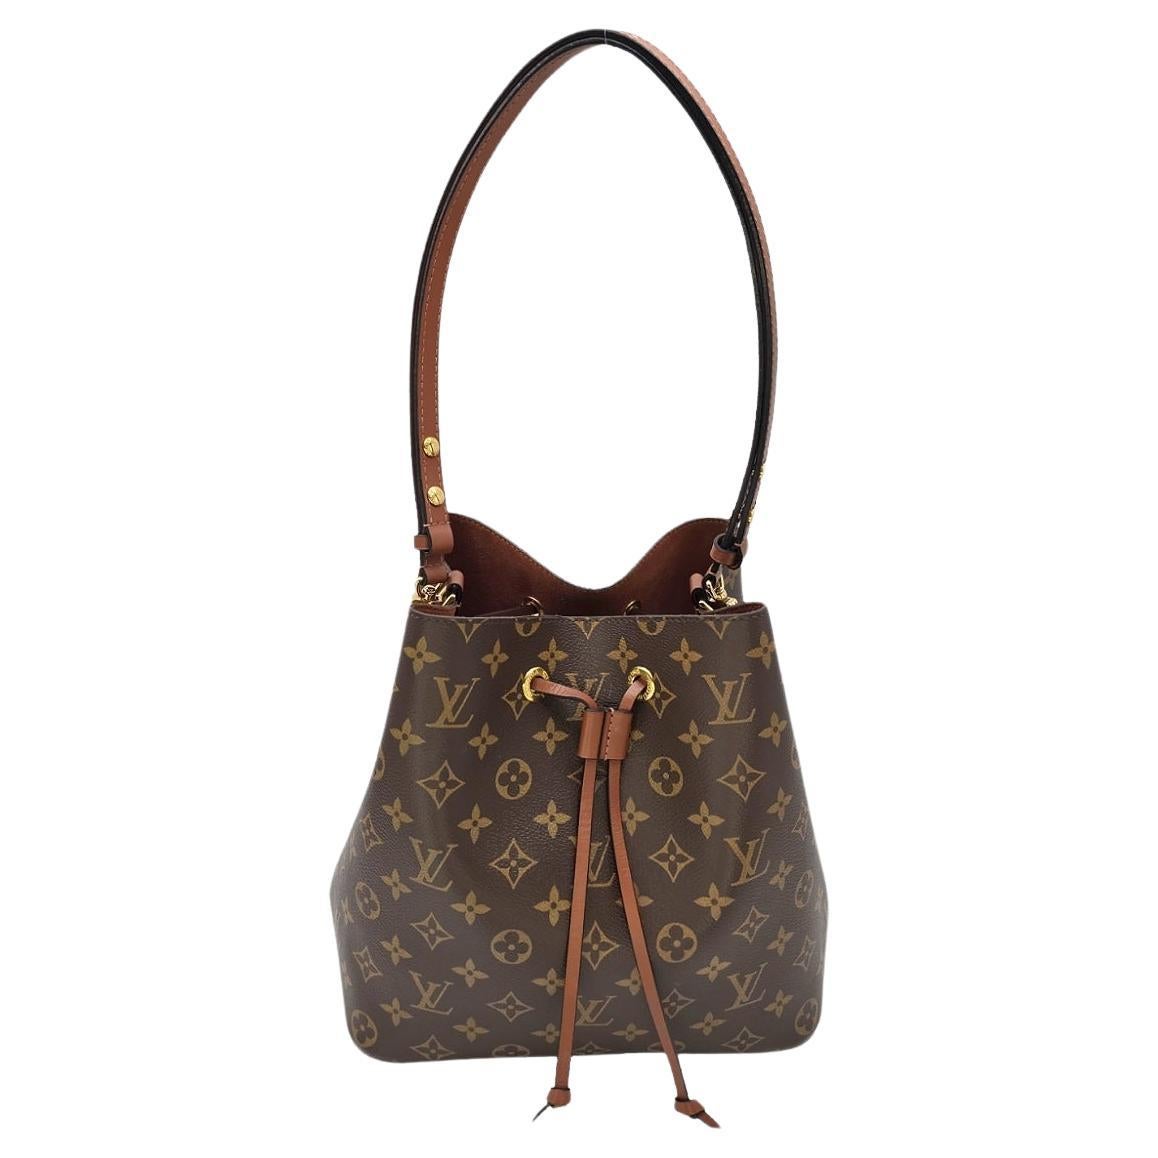 How do I get an even patina on Louis Vuitton?